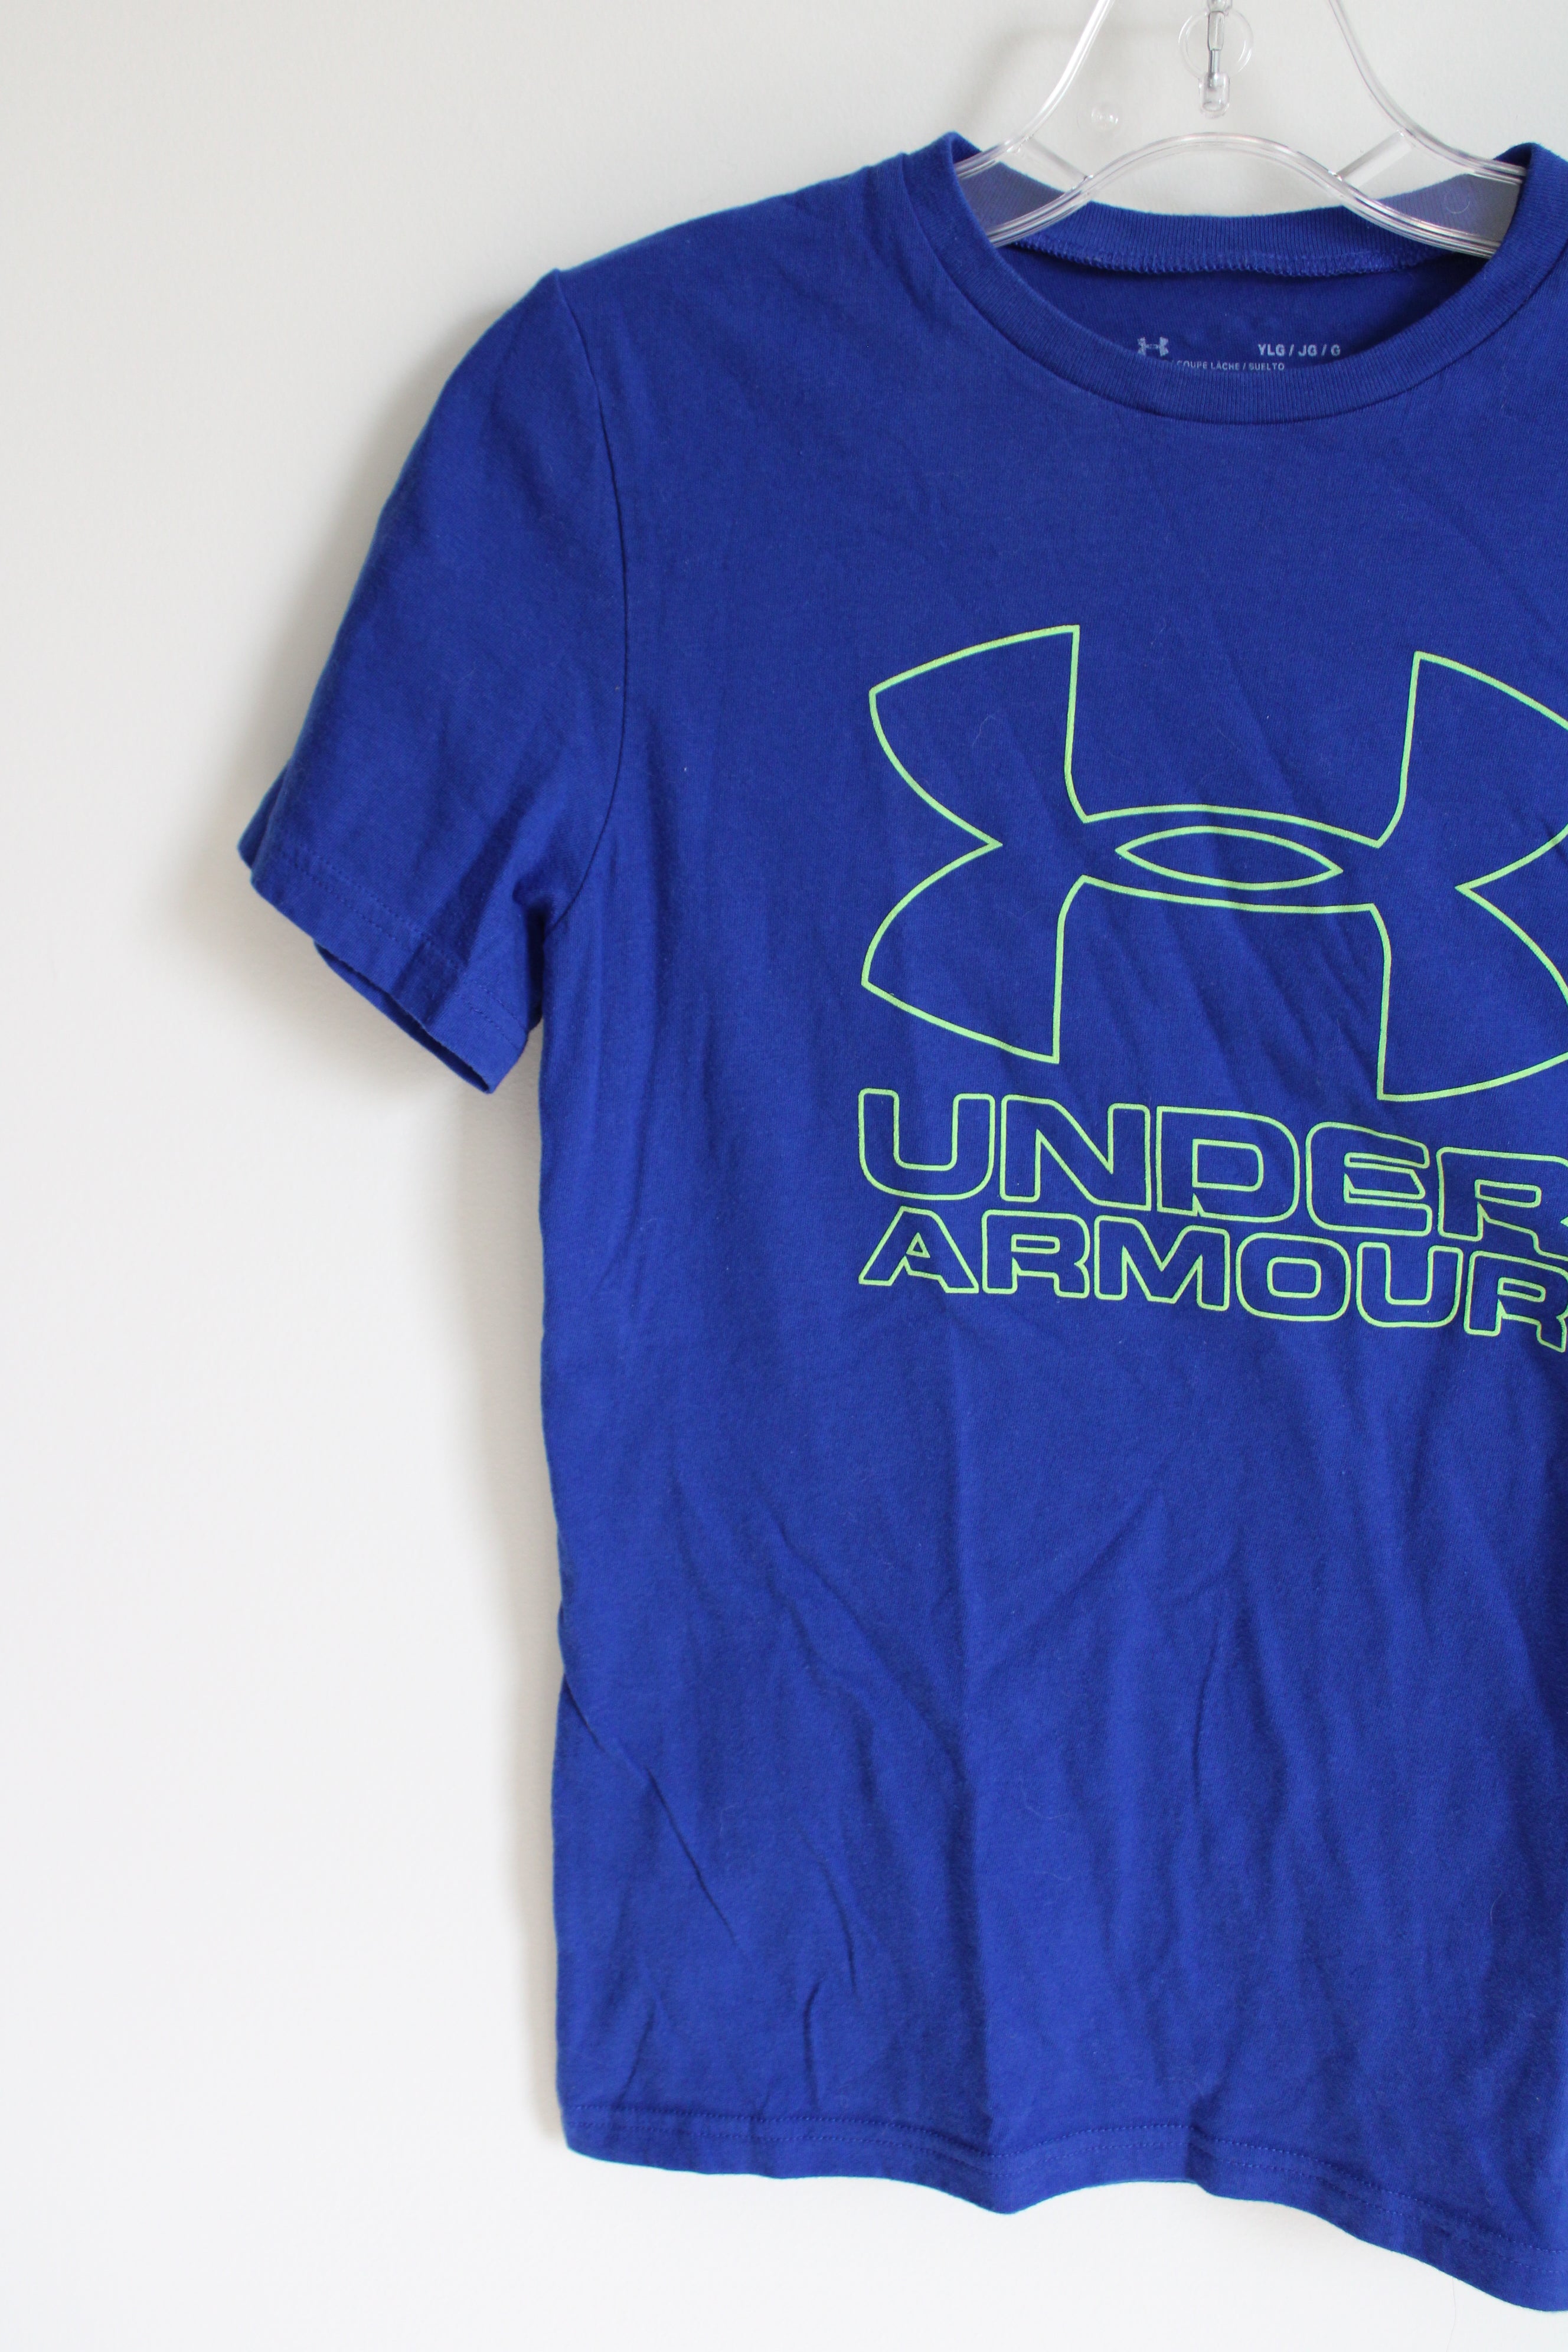 Under Armour Blue Logo Shirt | Youth L (14/16)